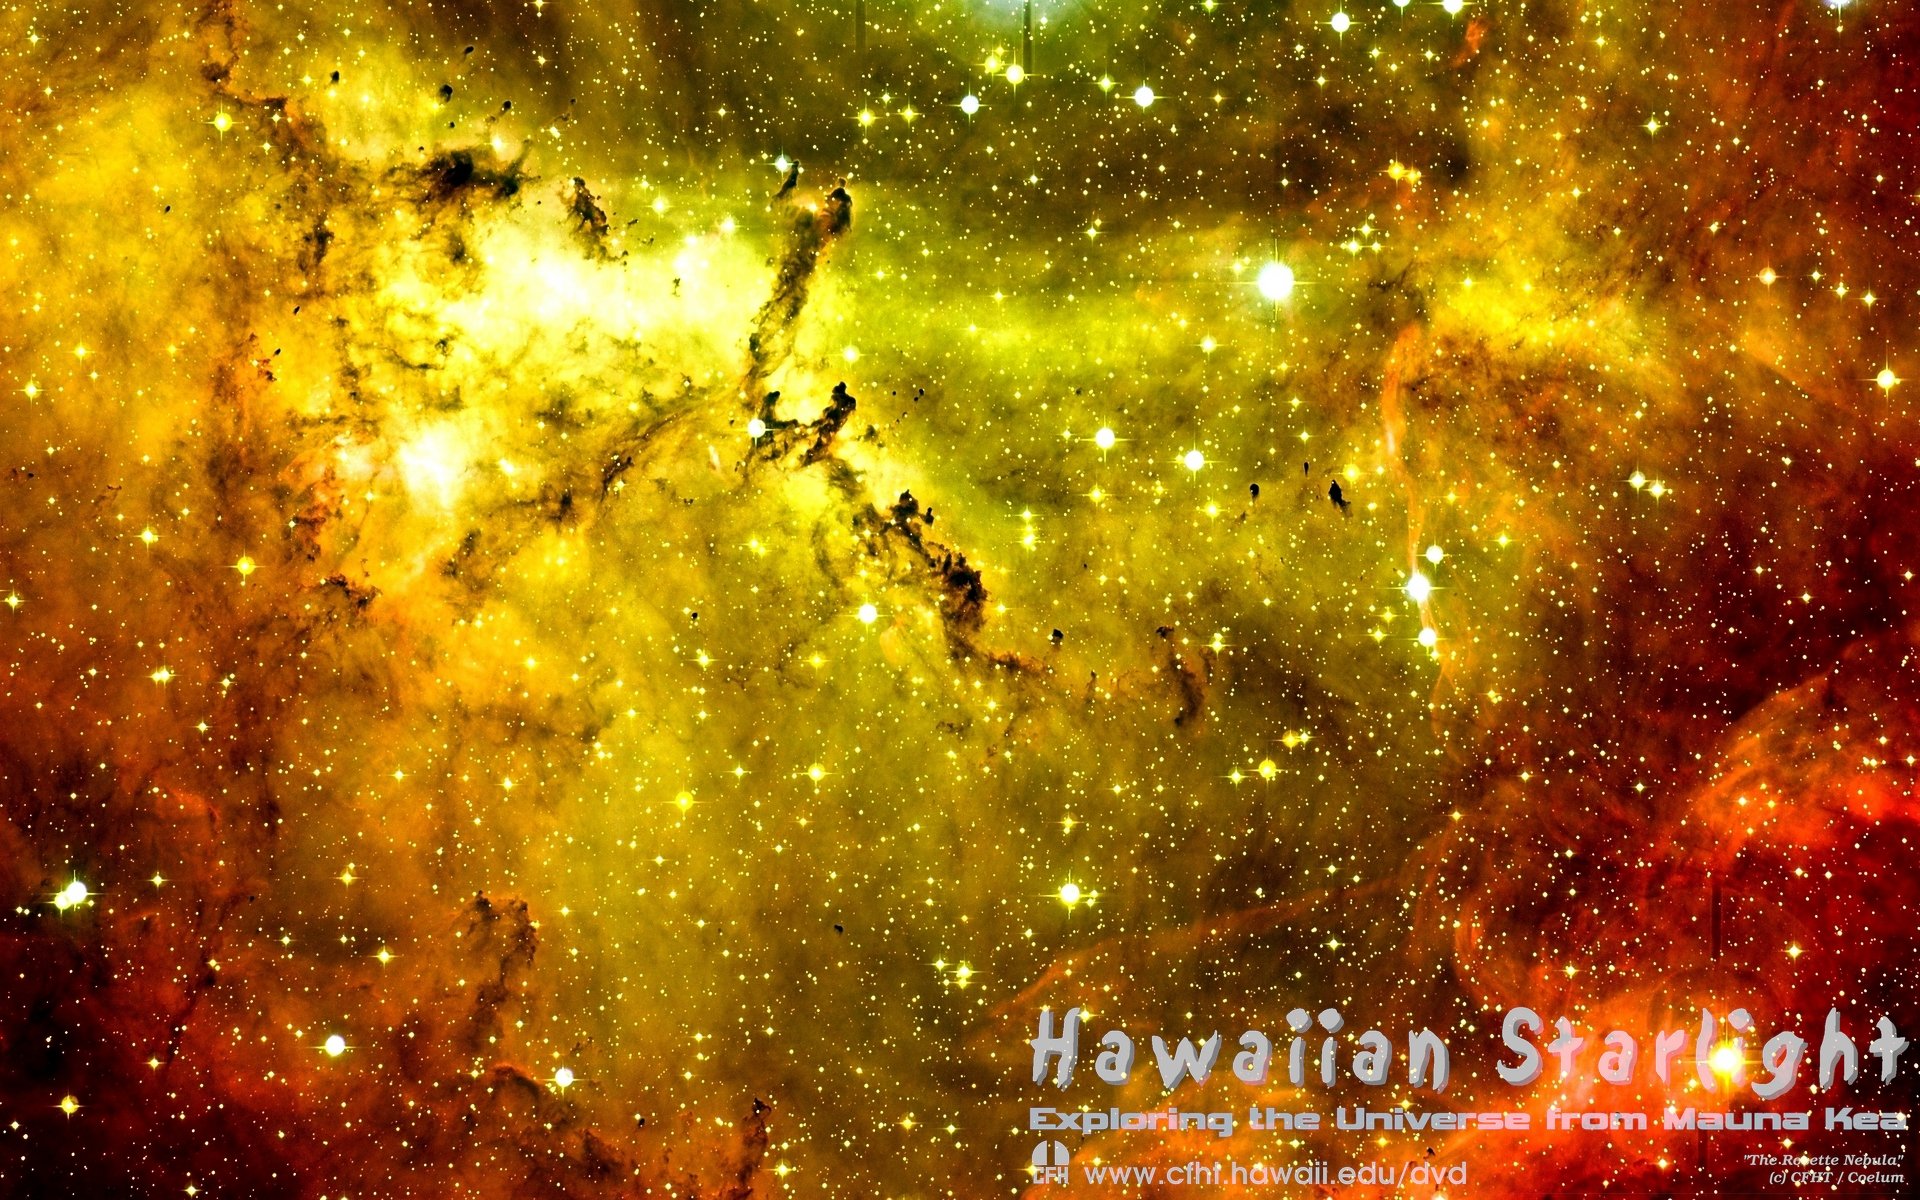 Hawaiian Starlight Film - Exploring the Universe from Mauna Kea - CFHT's  Official Site